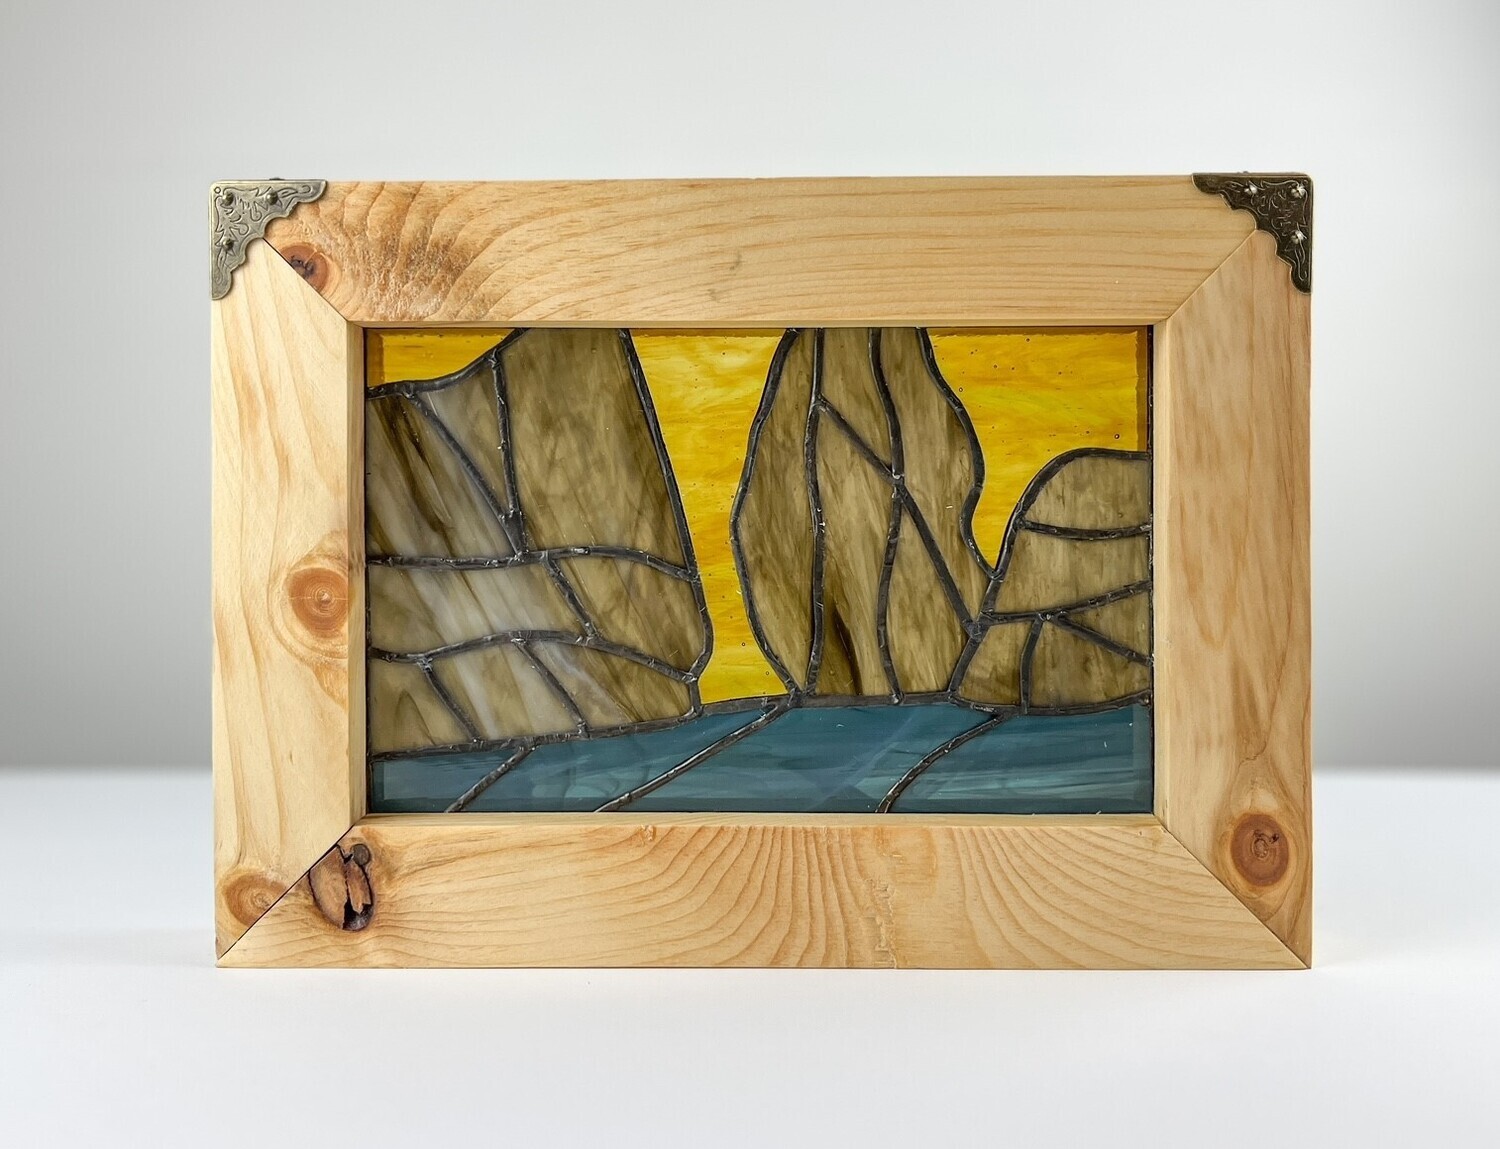 "Hopewell Rocks 9" 8x12" Framed Stained Glass